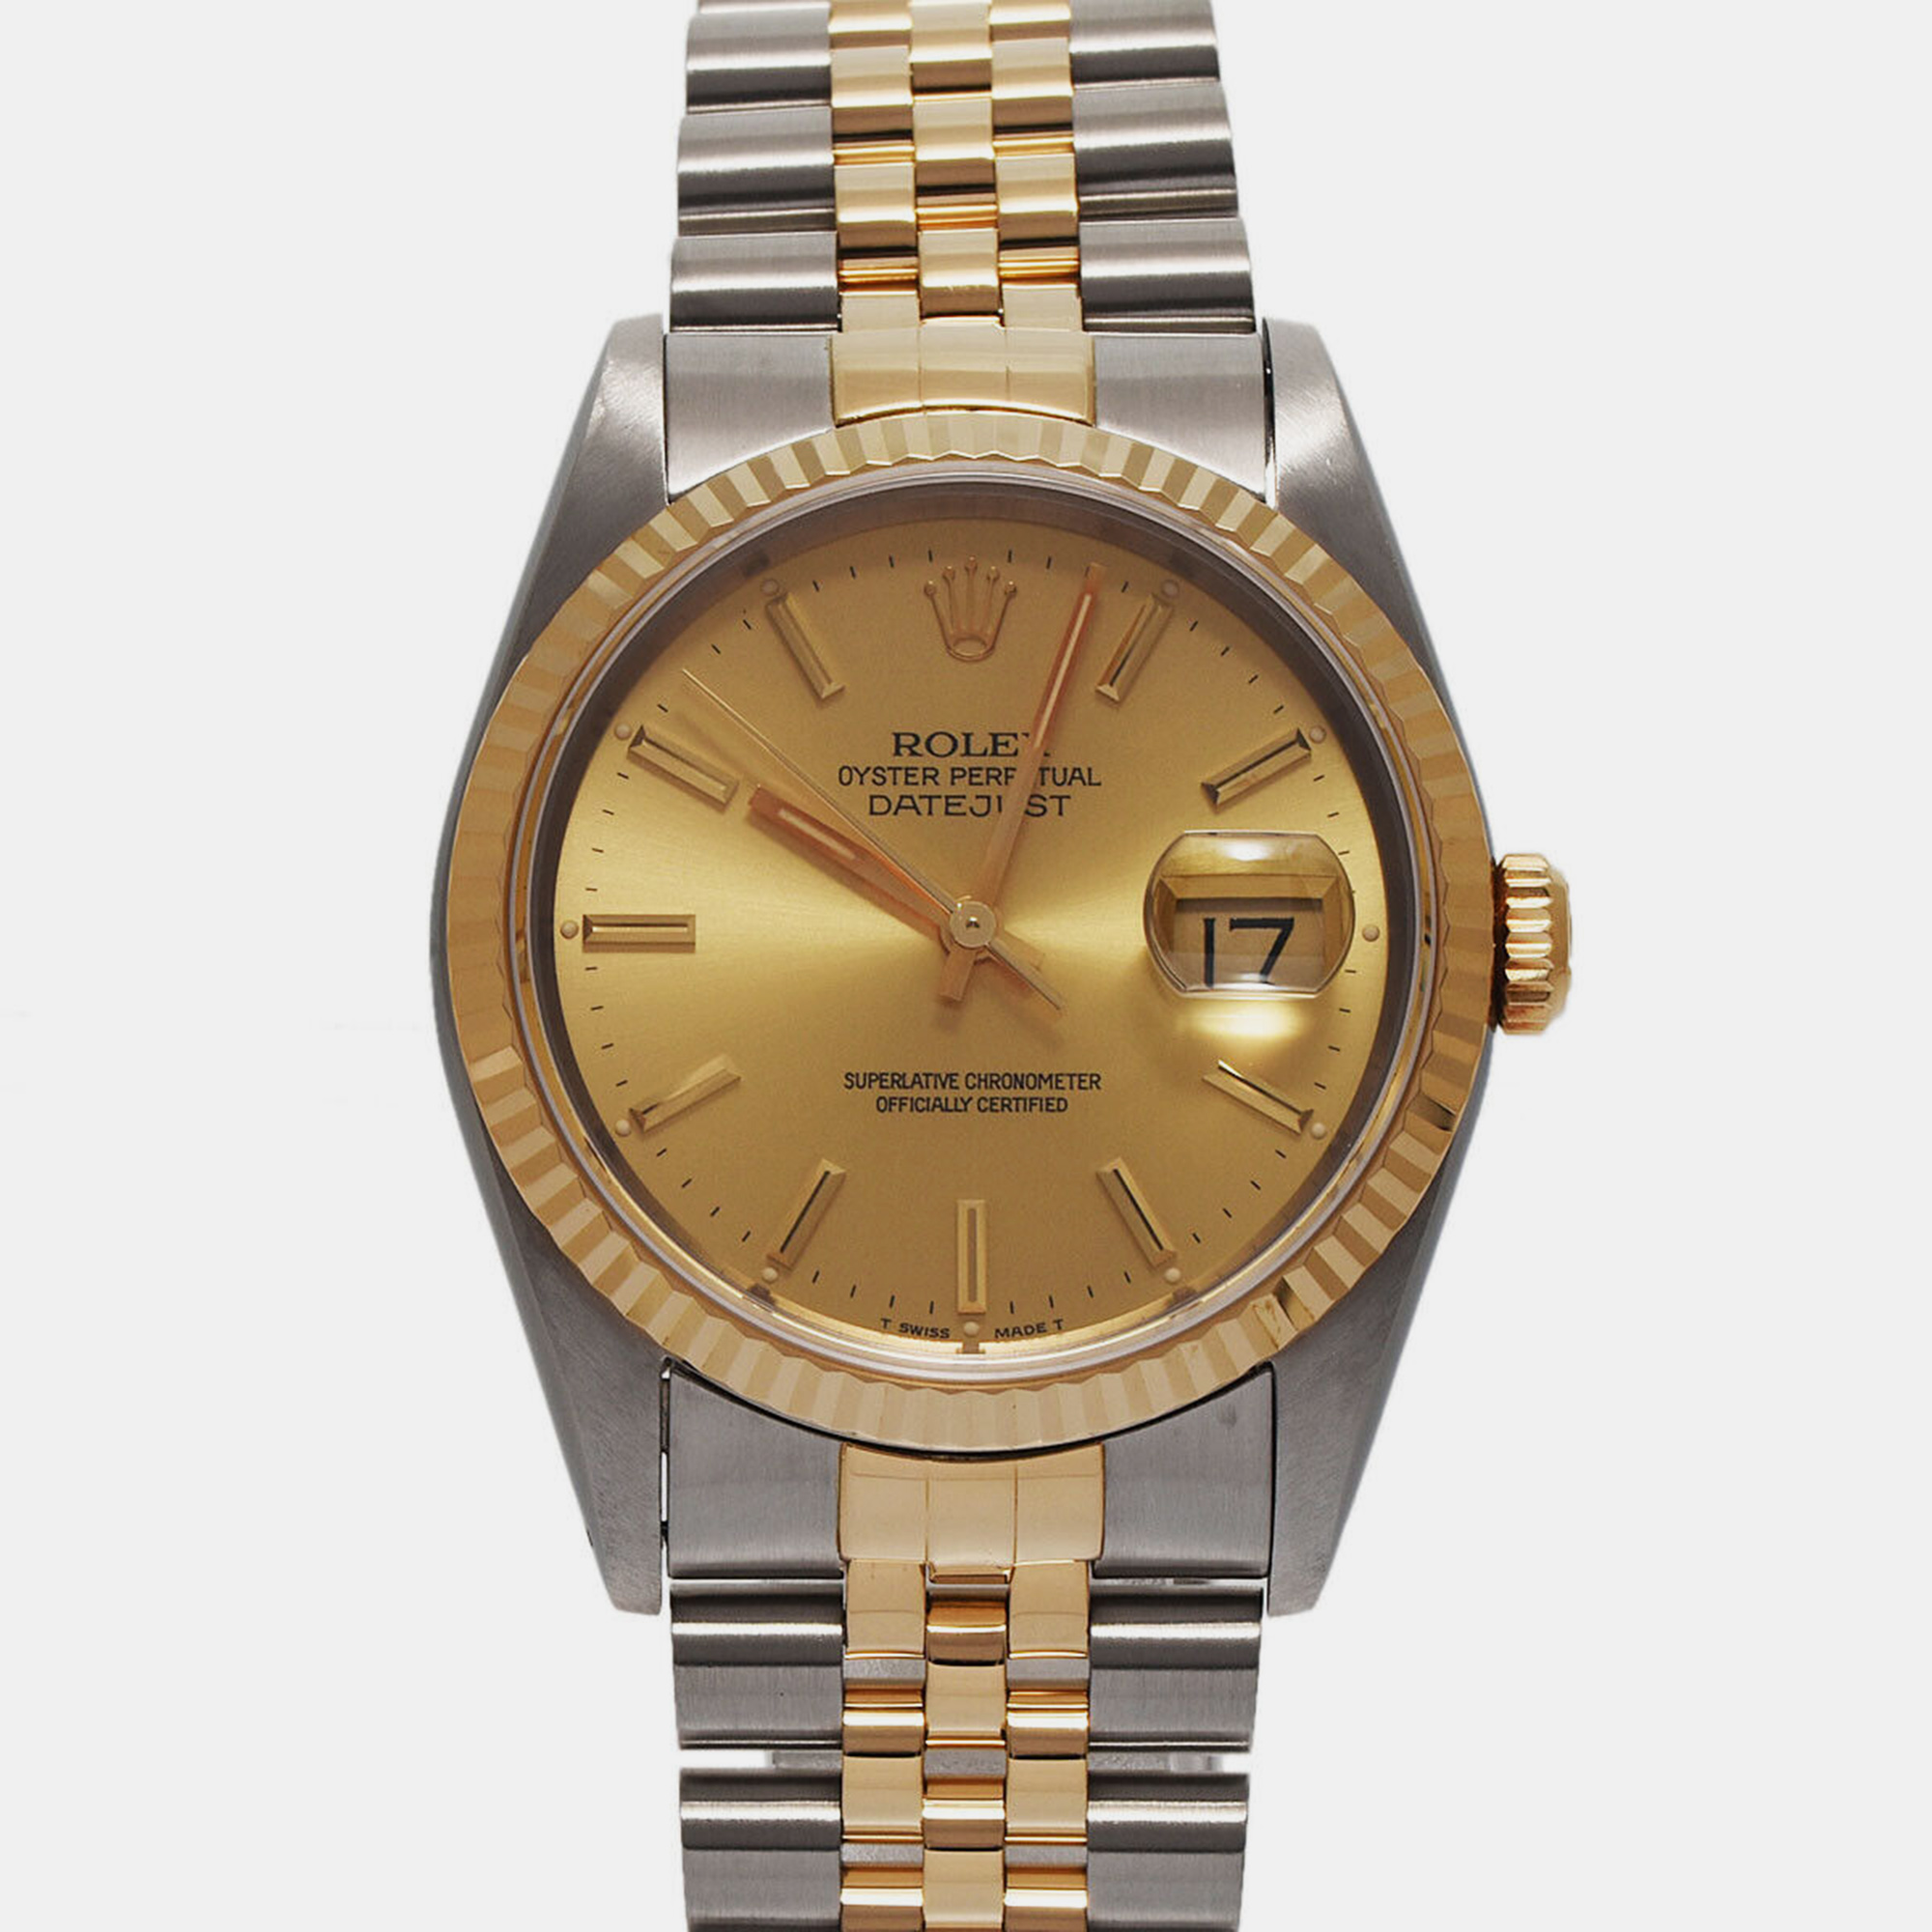 Rolex champagne 18k yellow gold stainless steel datejust 16233 automatic men's wristwatch 36 mm